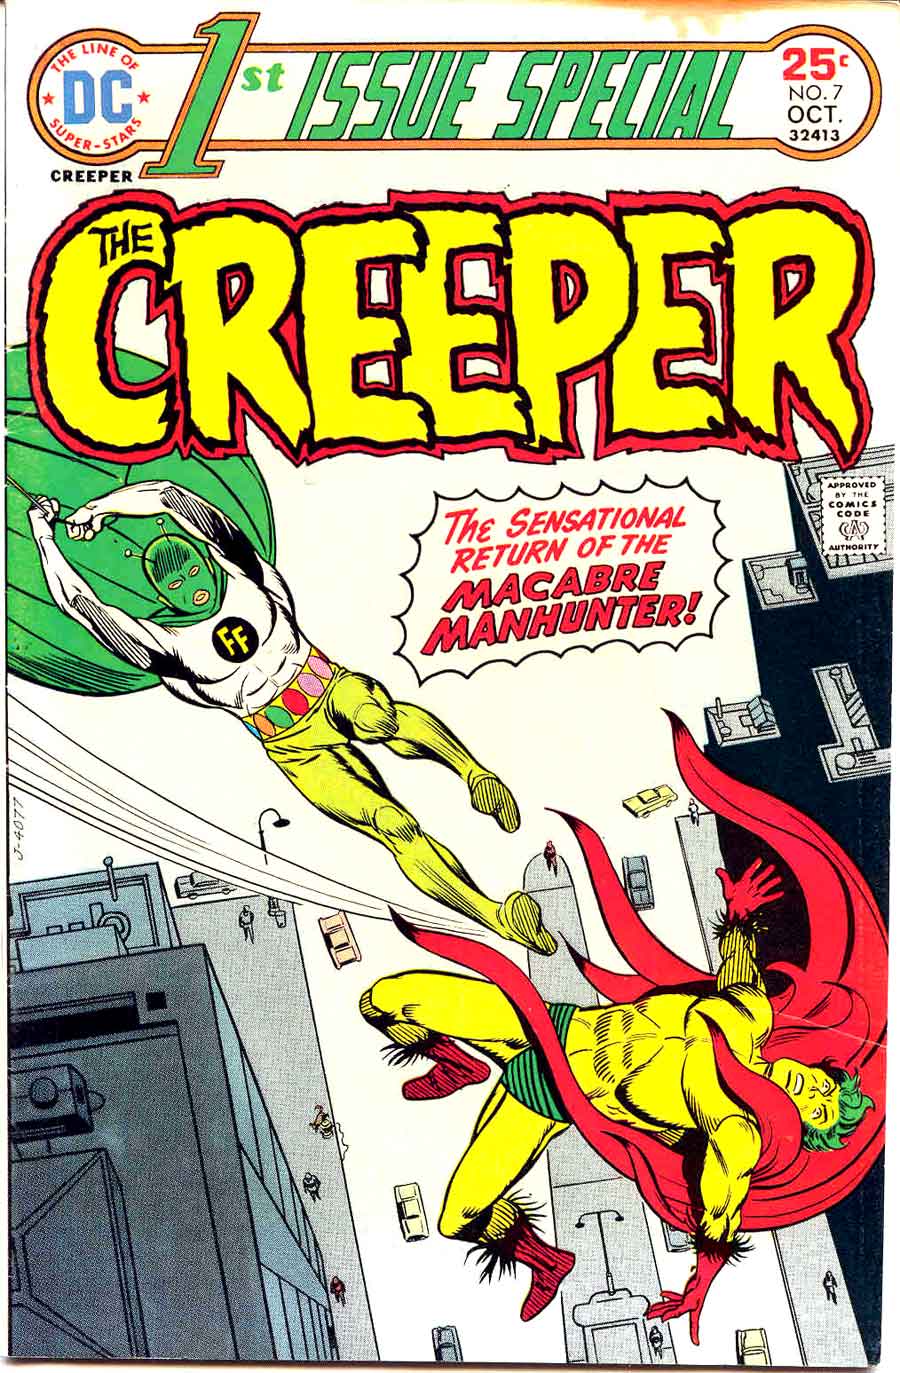 1st Issue Special #7 / The Creeper - Steve Ditko art & cover - Pencil Ink